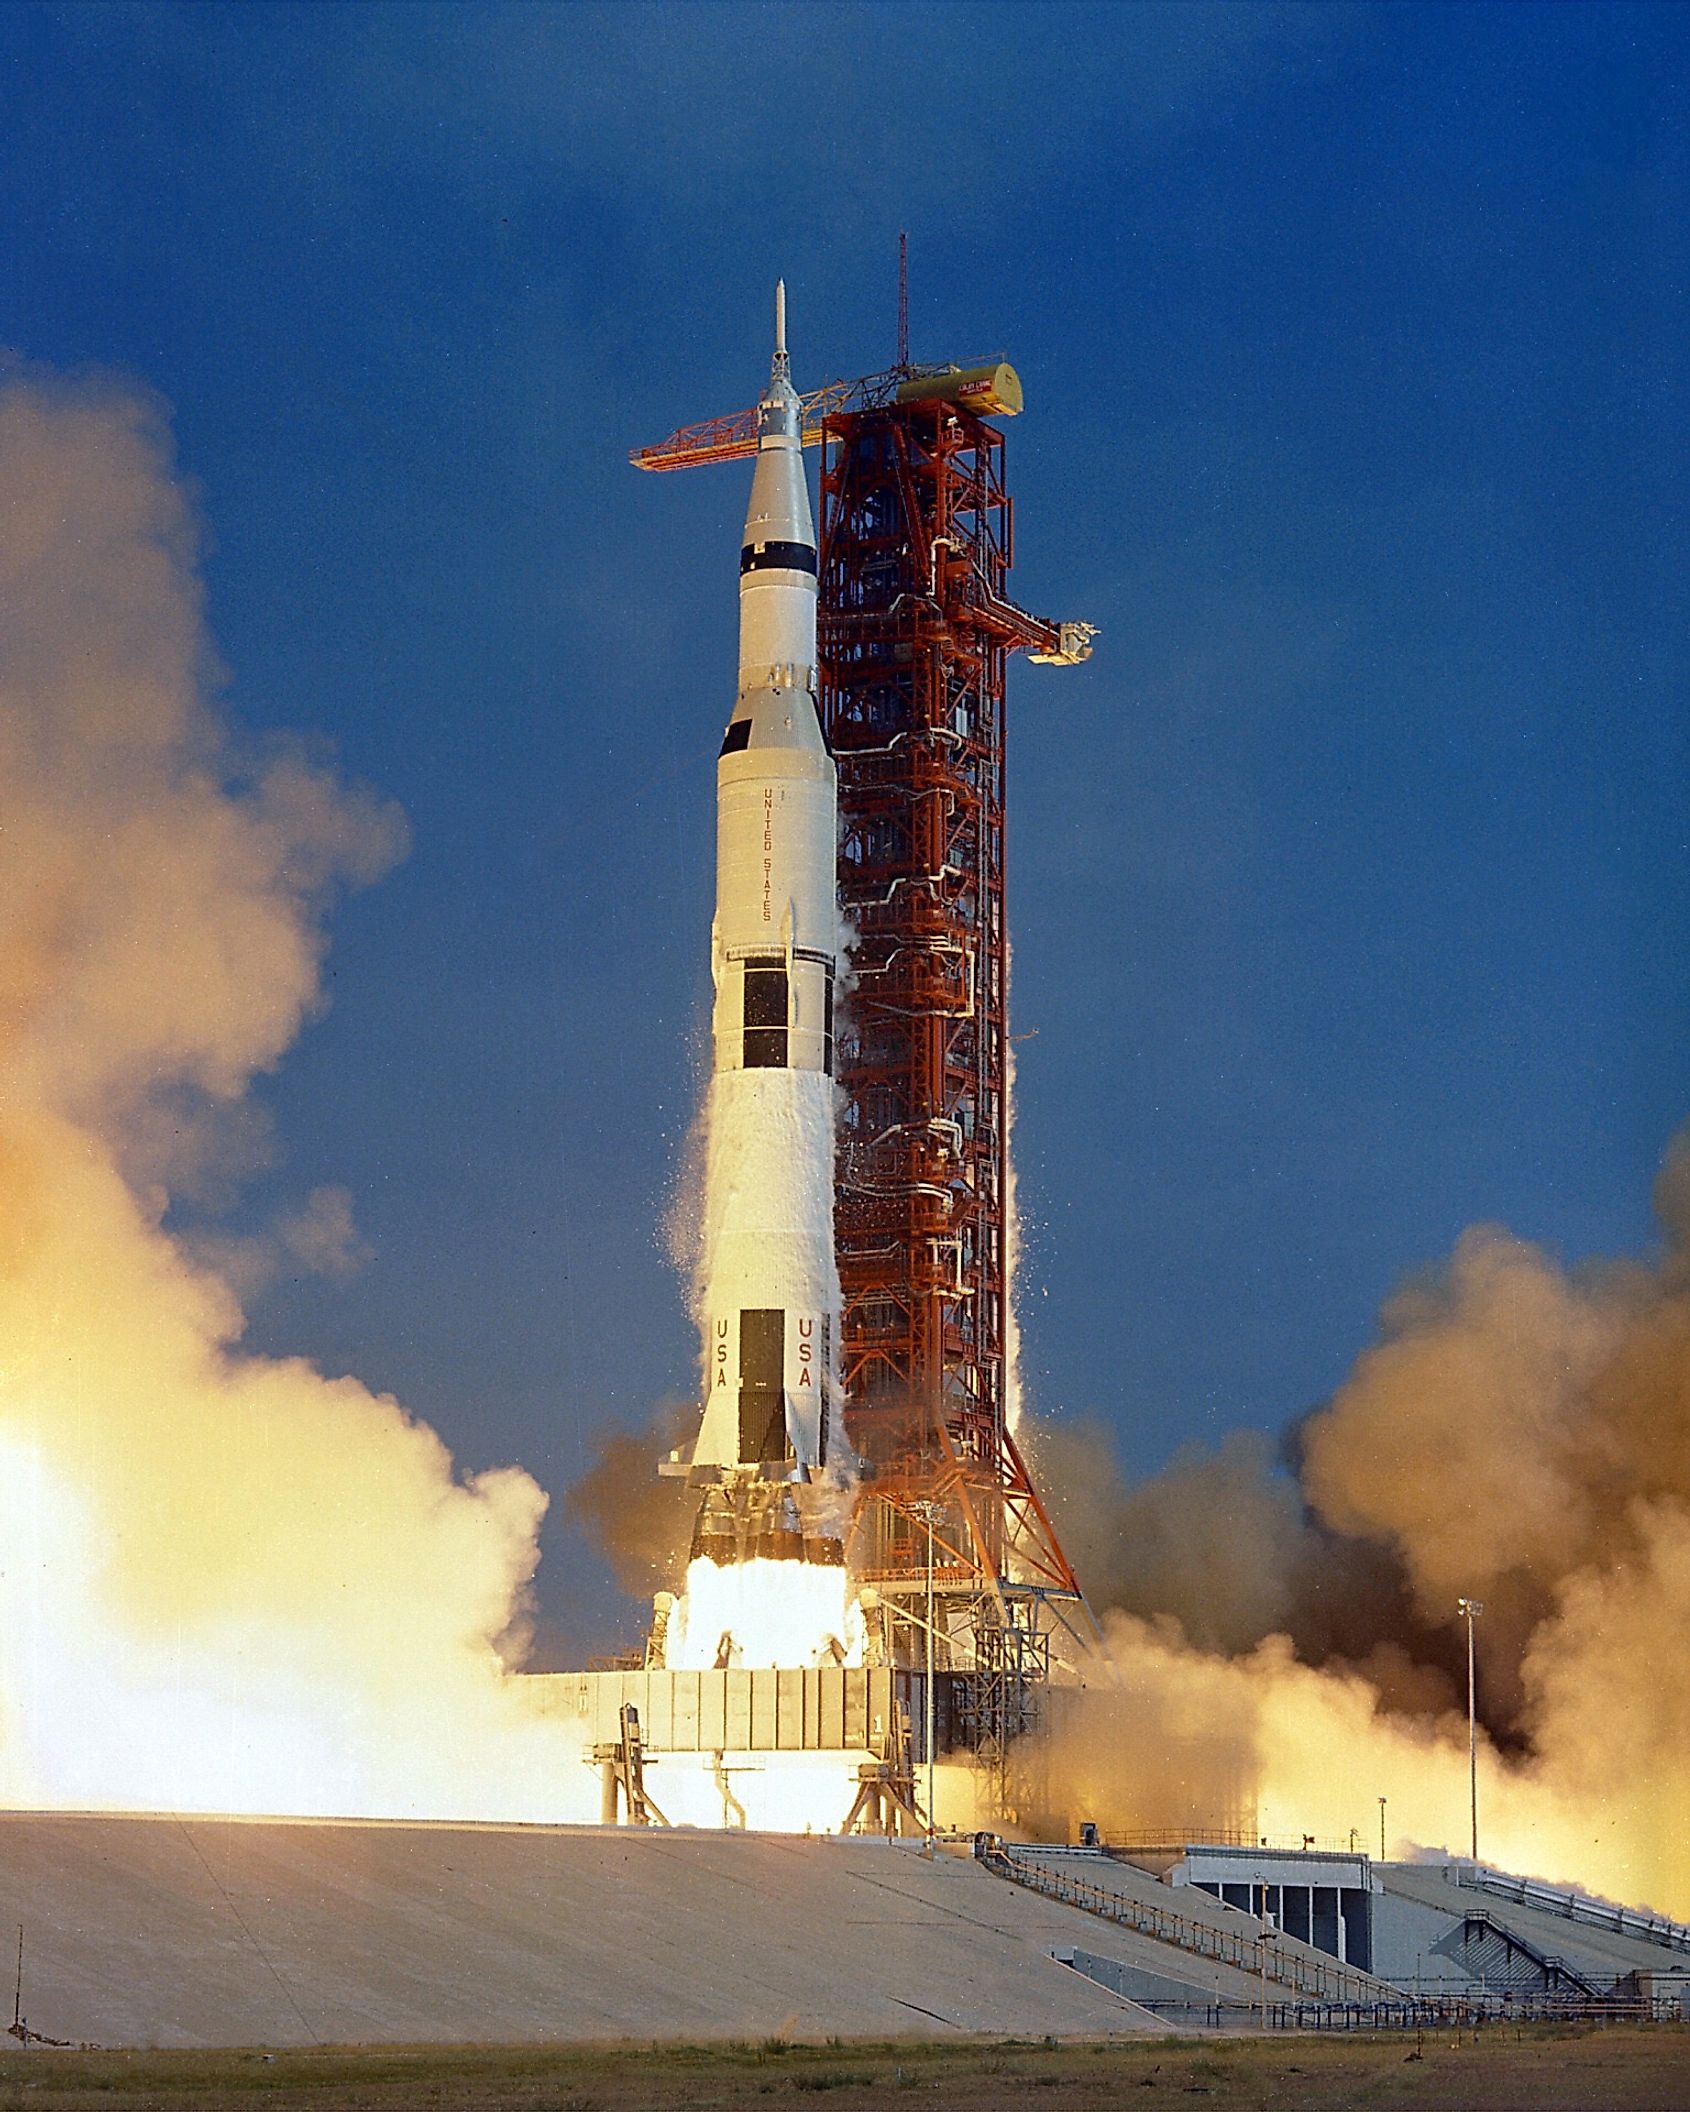 Apollo 11 launching from the Earth’s surface in 1969. Image credit: NASA